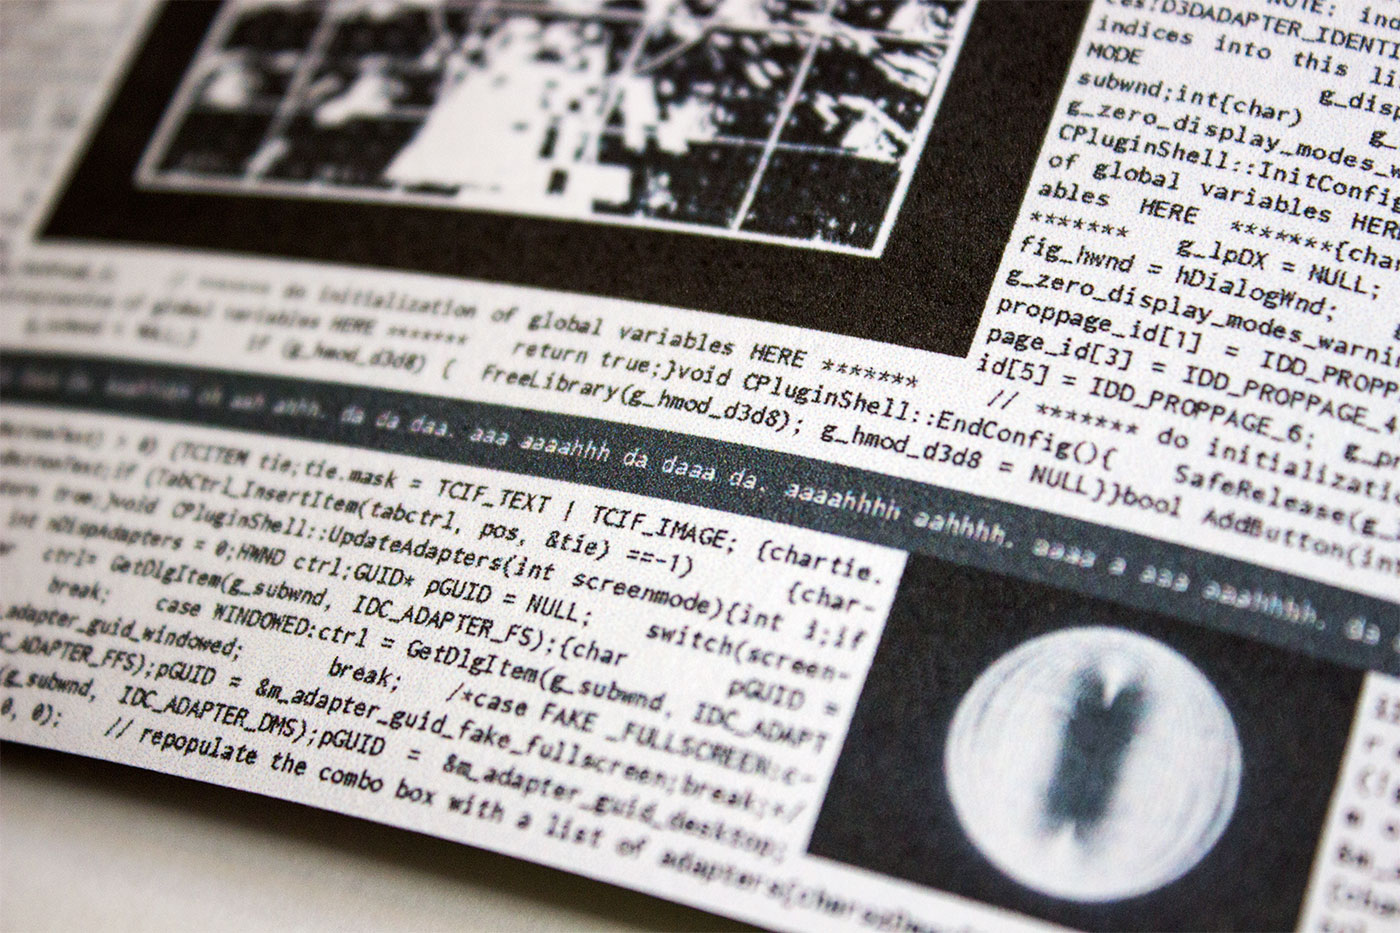 details-book-design3-music-art-lush-records-by-graphic-designer-and-artist-marie-brogger